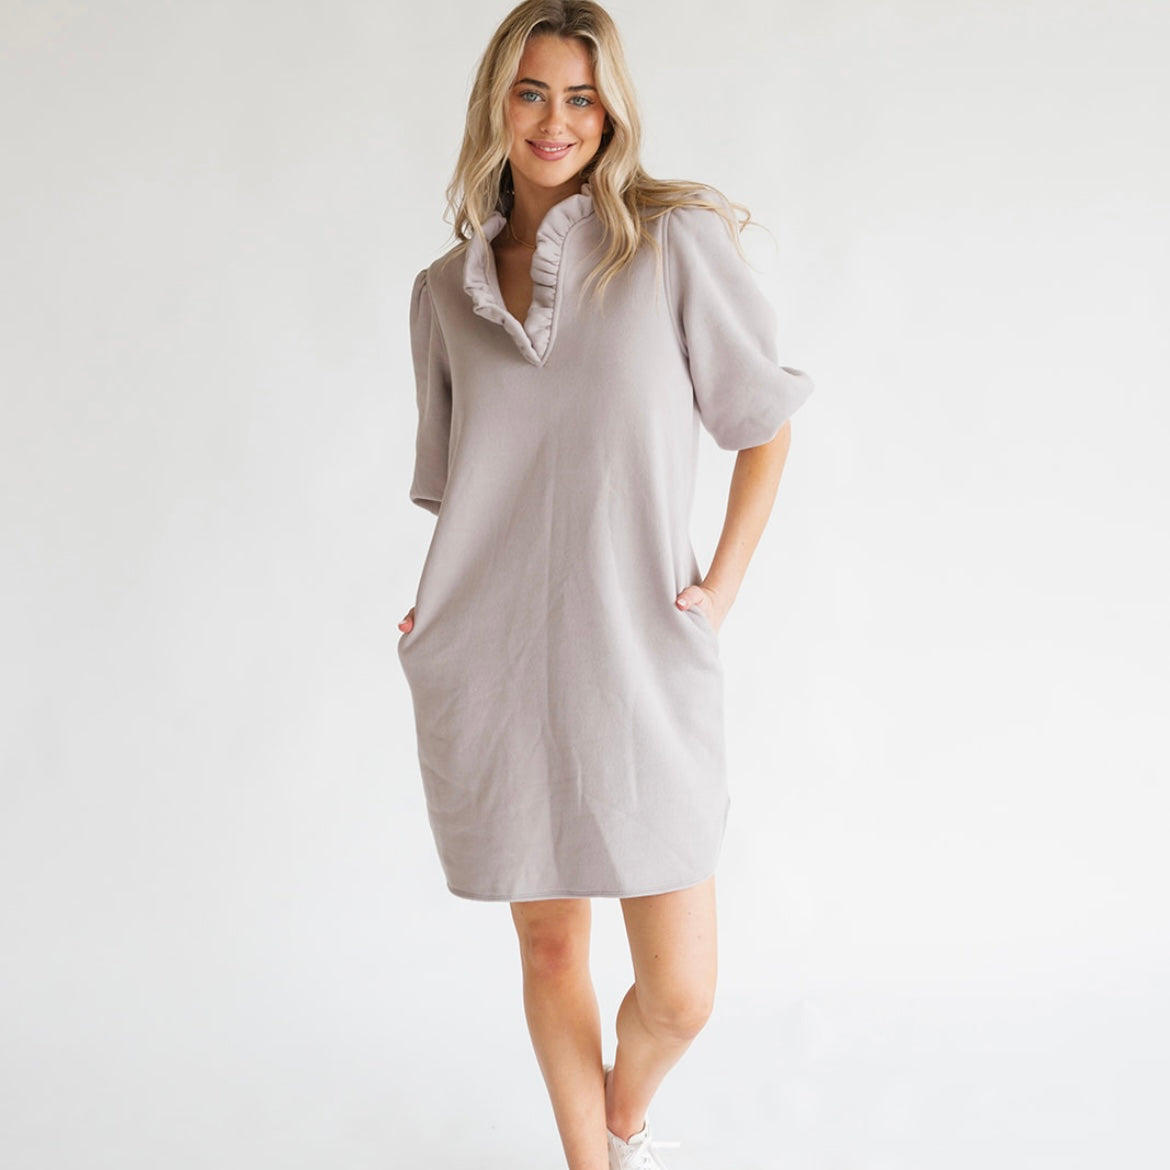 the EVELYN dress